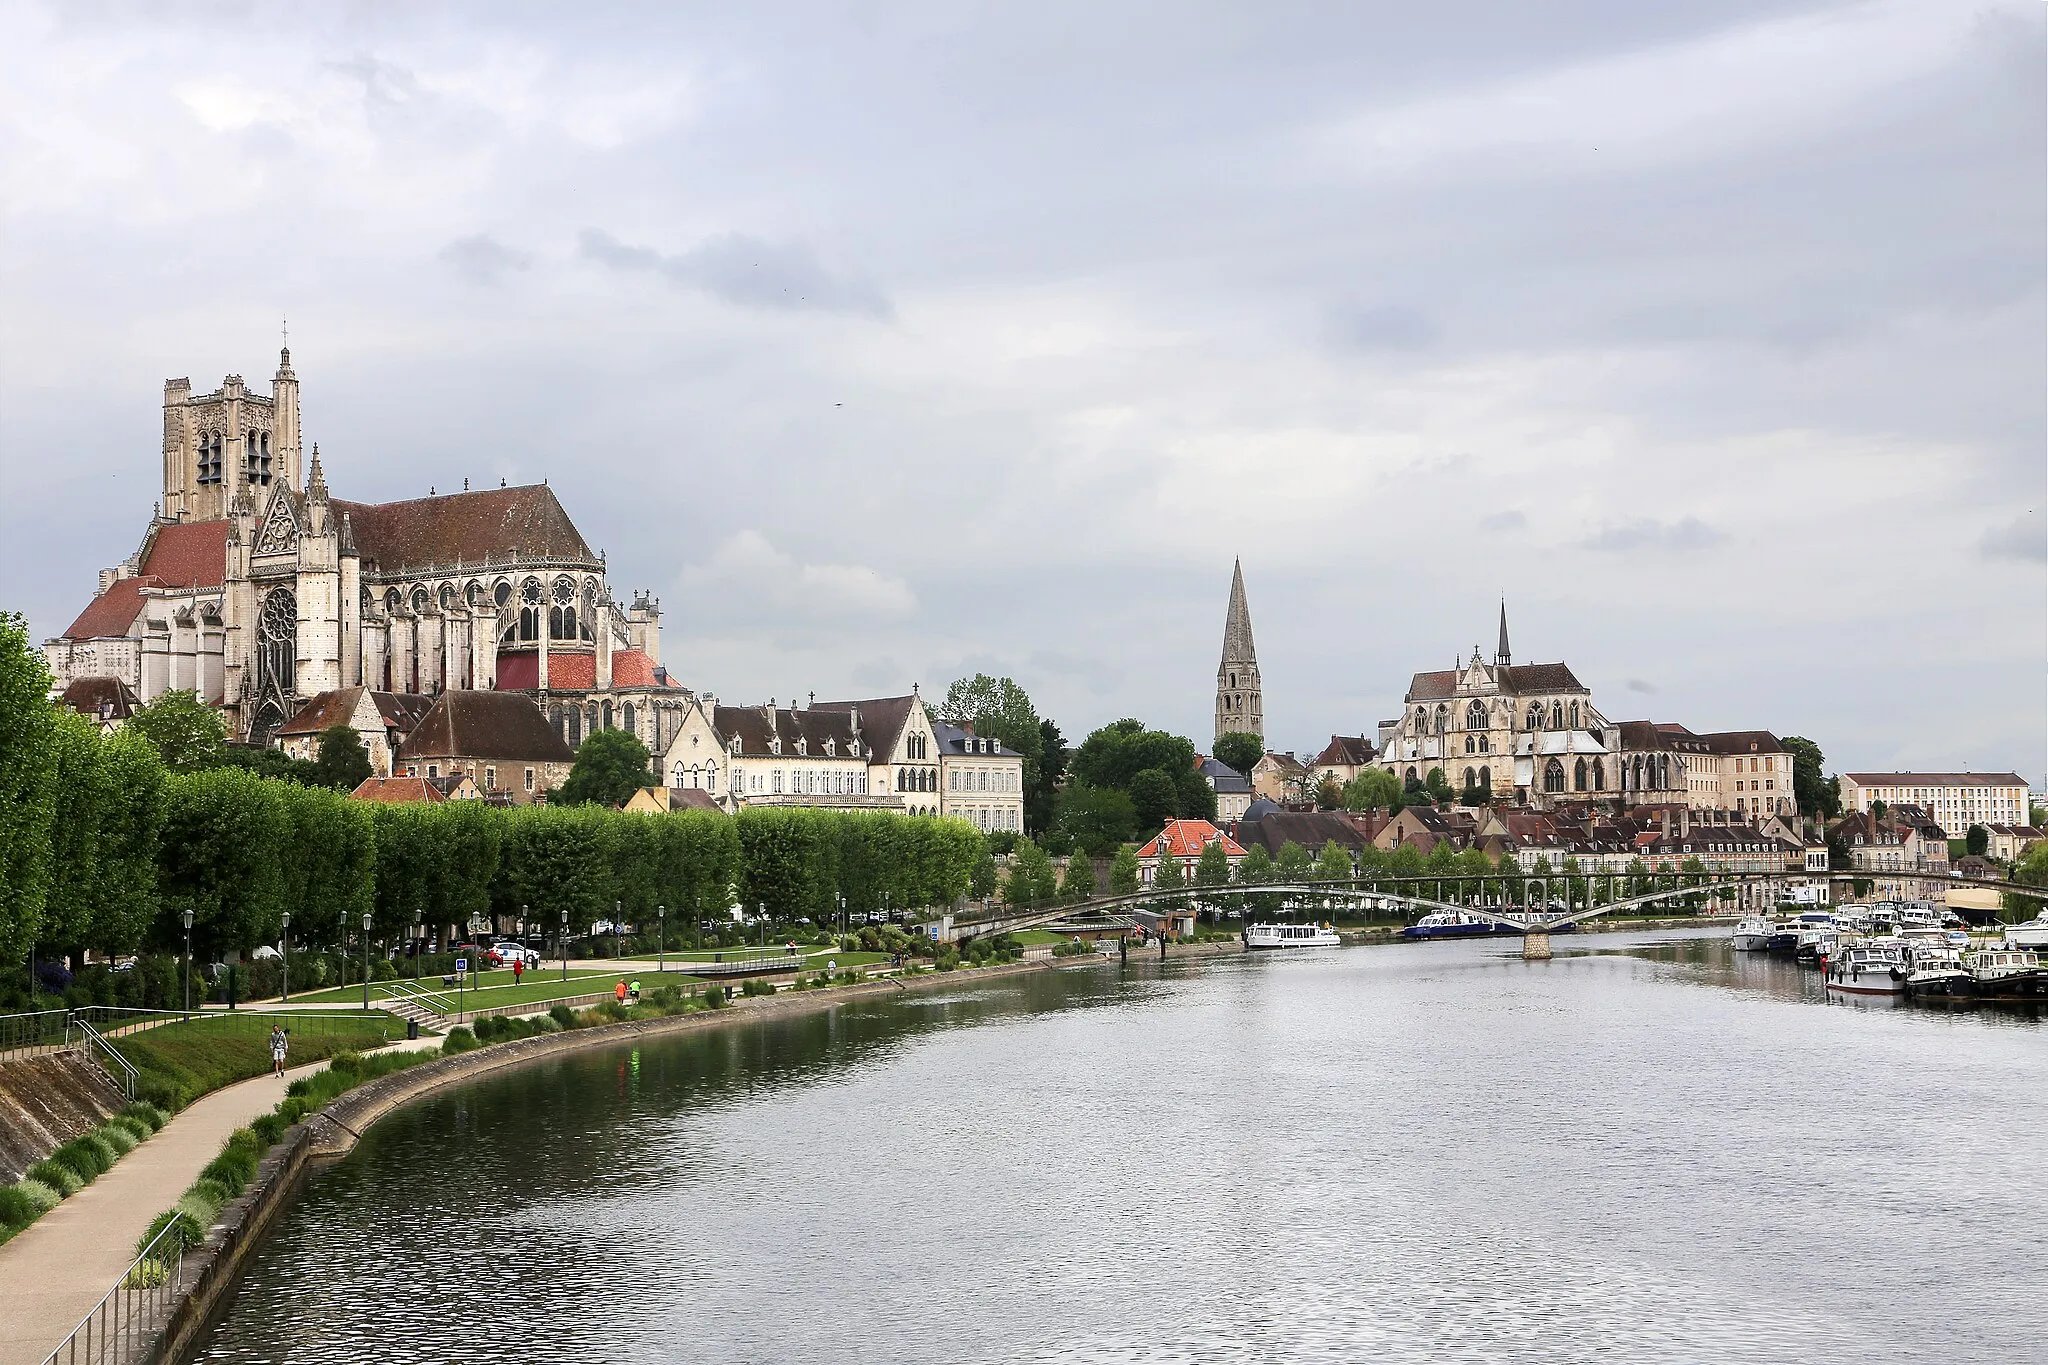 Photo showing: View of Auxerre, a French town with about 35,000 inhabitants in the northwestern part of the Burgundy-Franche-Comté region, in the Yonne department. Auxerre Cathedral on the left, the tower of the Saint-Germain church in the center and the former Saint-Germain Abbey on the right. In the foreground the bridge over the river Yonne.